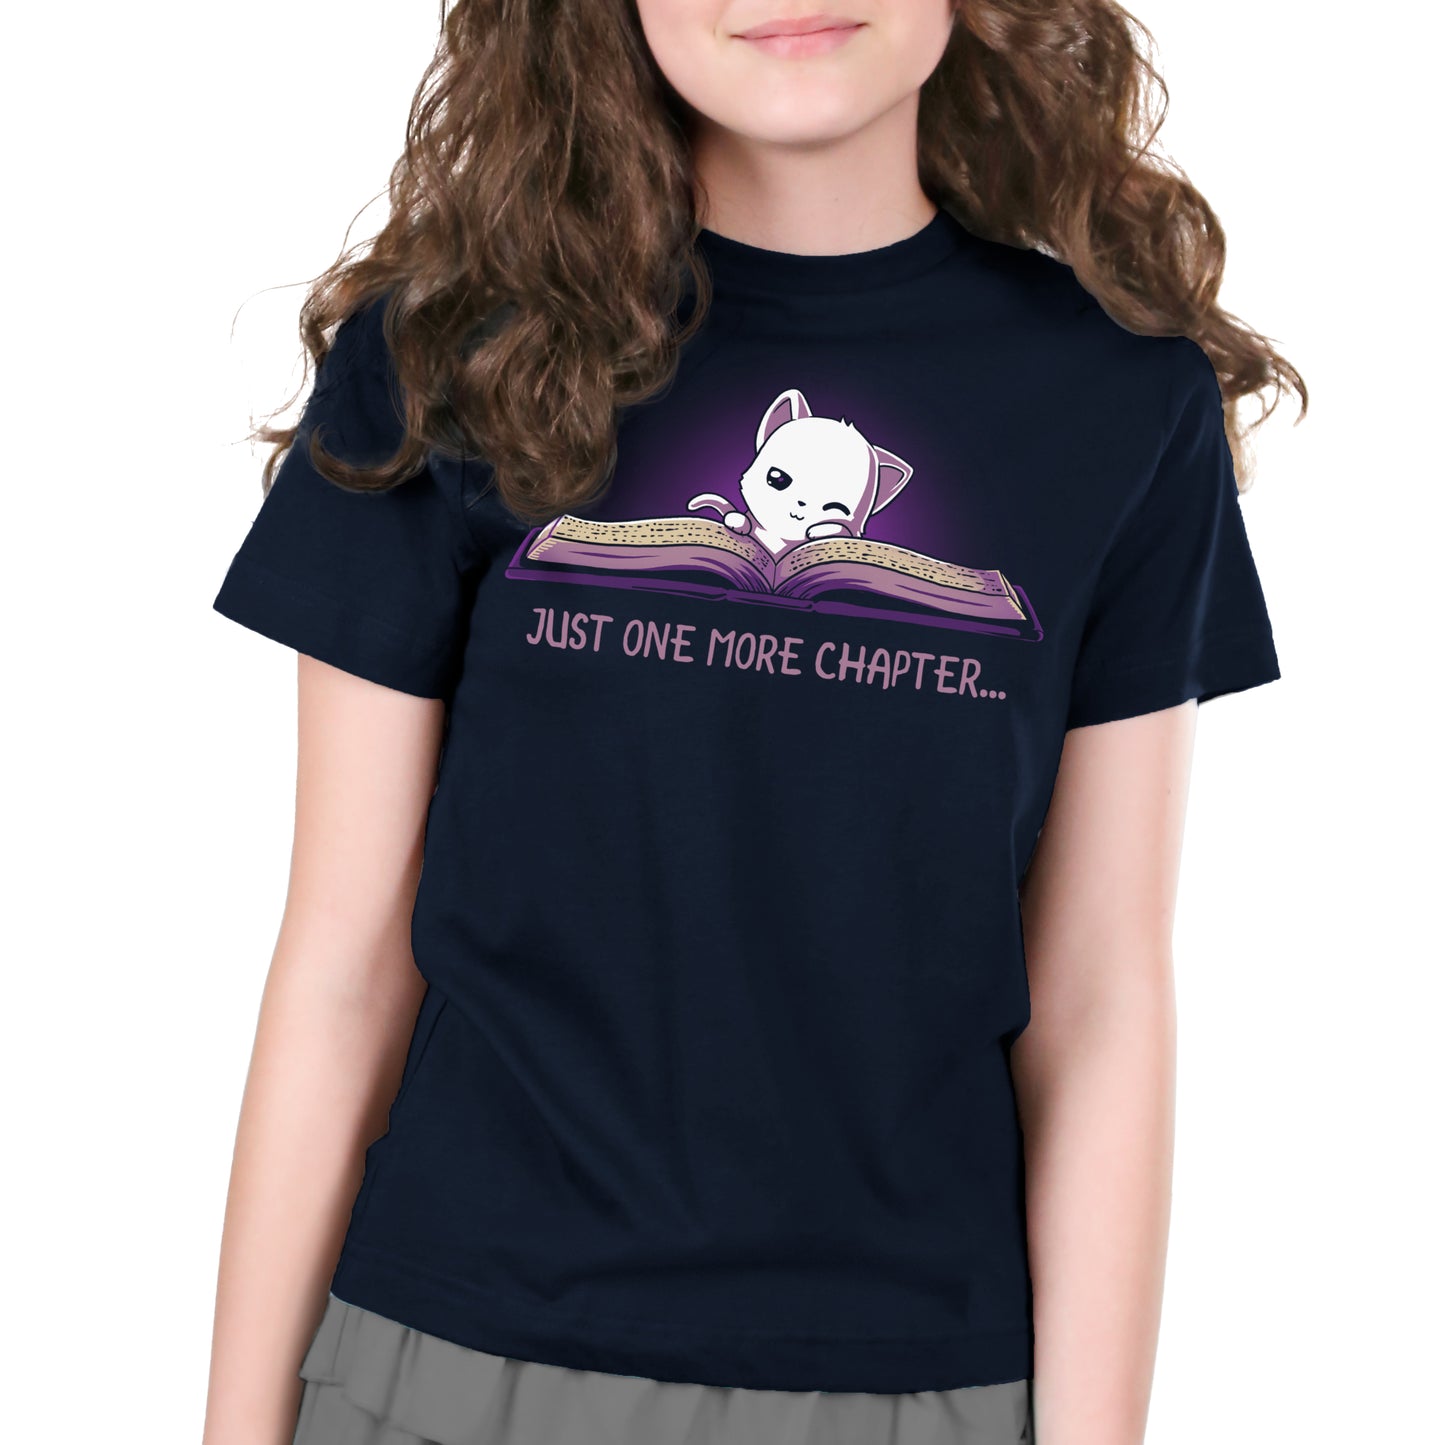 A girl wearing a navy blue Just One More Chapter T-shirt from TeeTurtle.